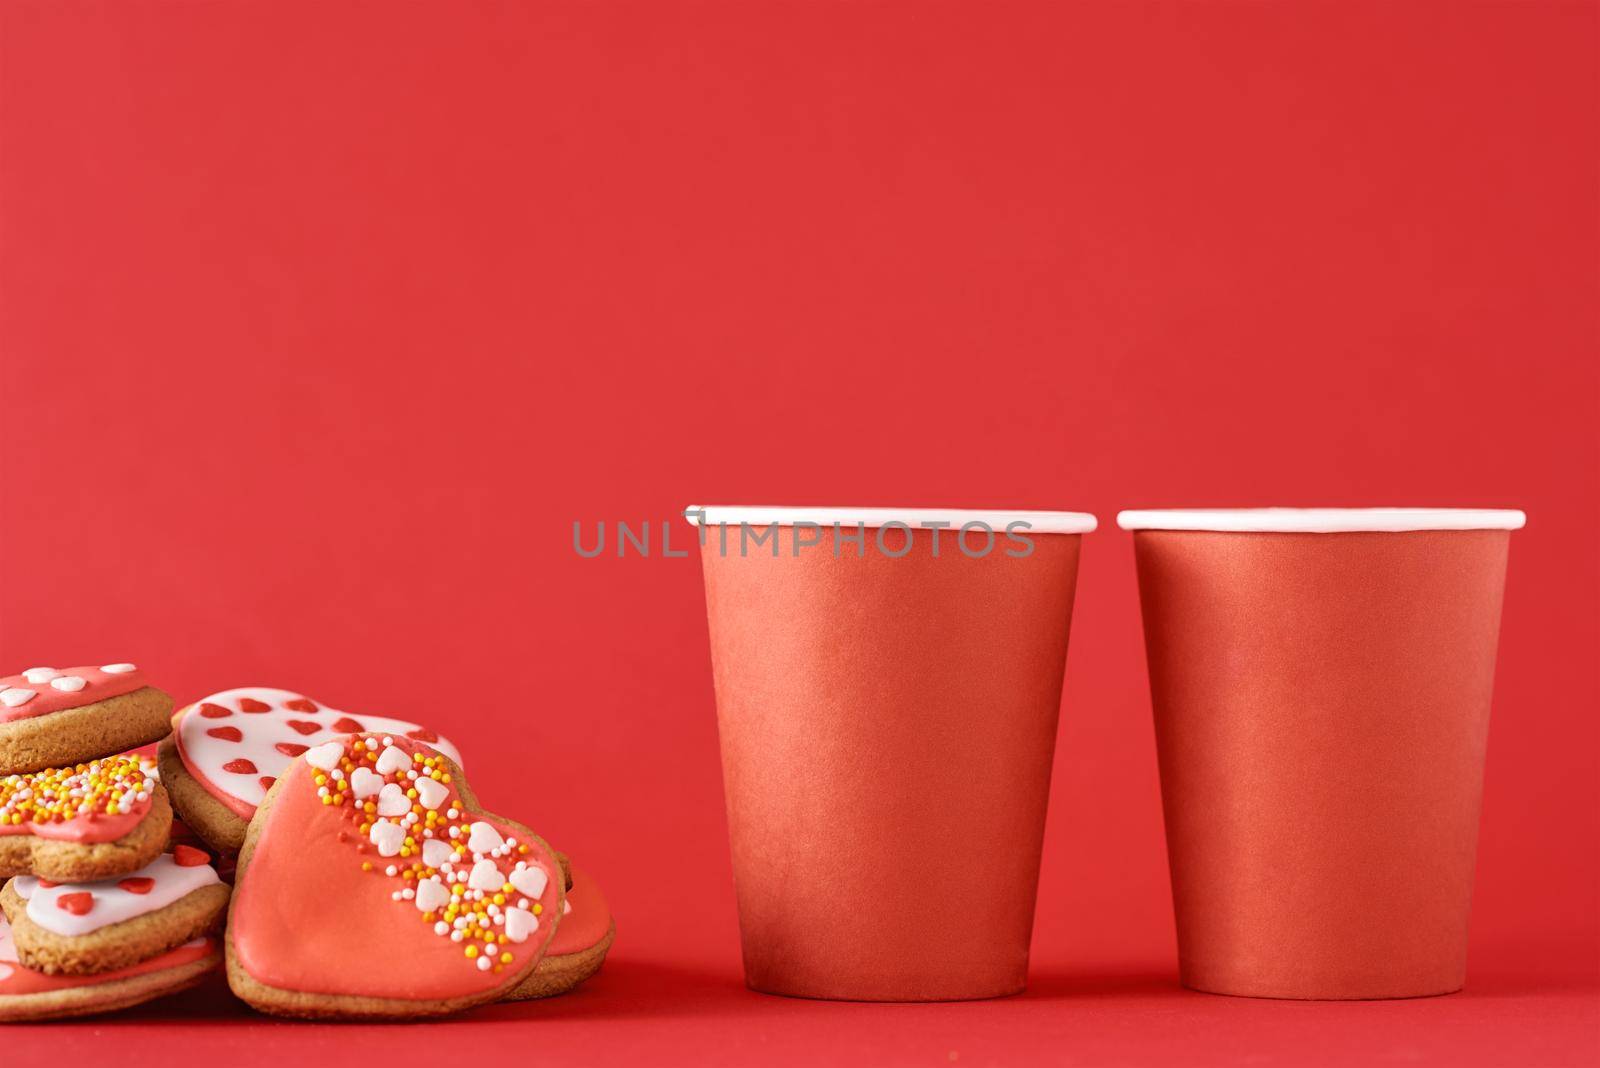 Decorated heart shape cookies and two paper coffee cups on the red background. Valentines Day food concept by Lazy_Bear